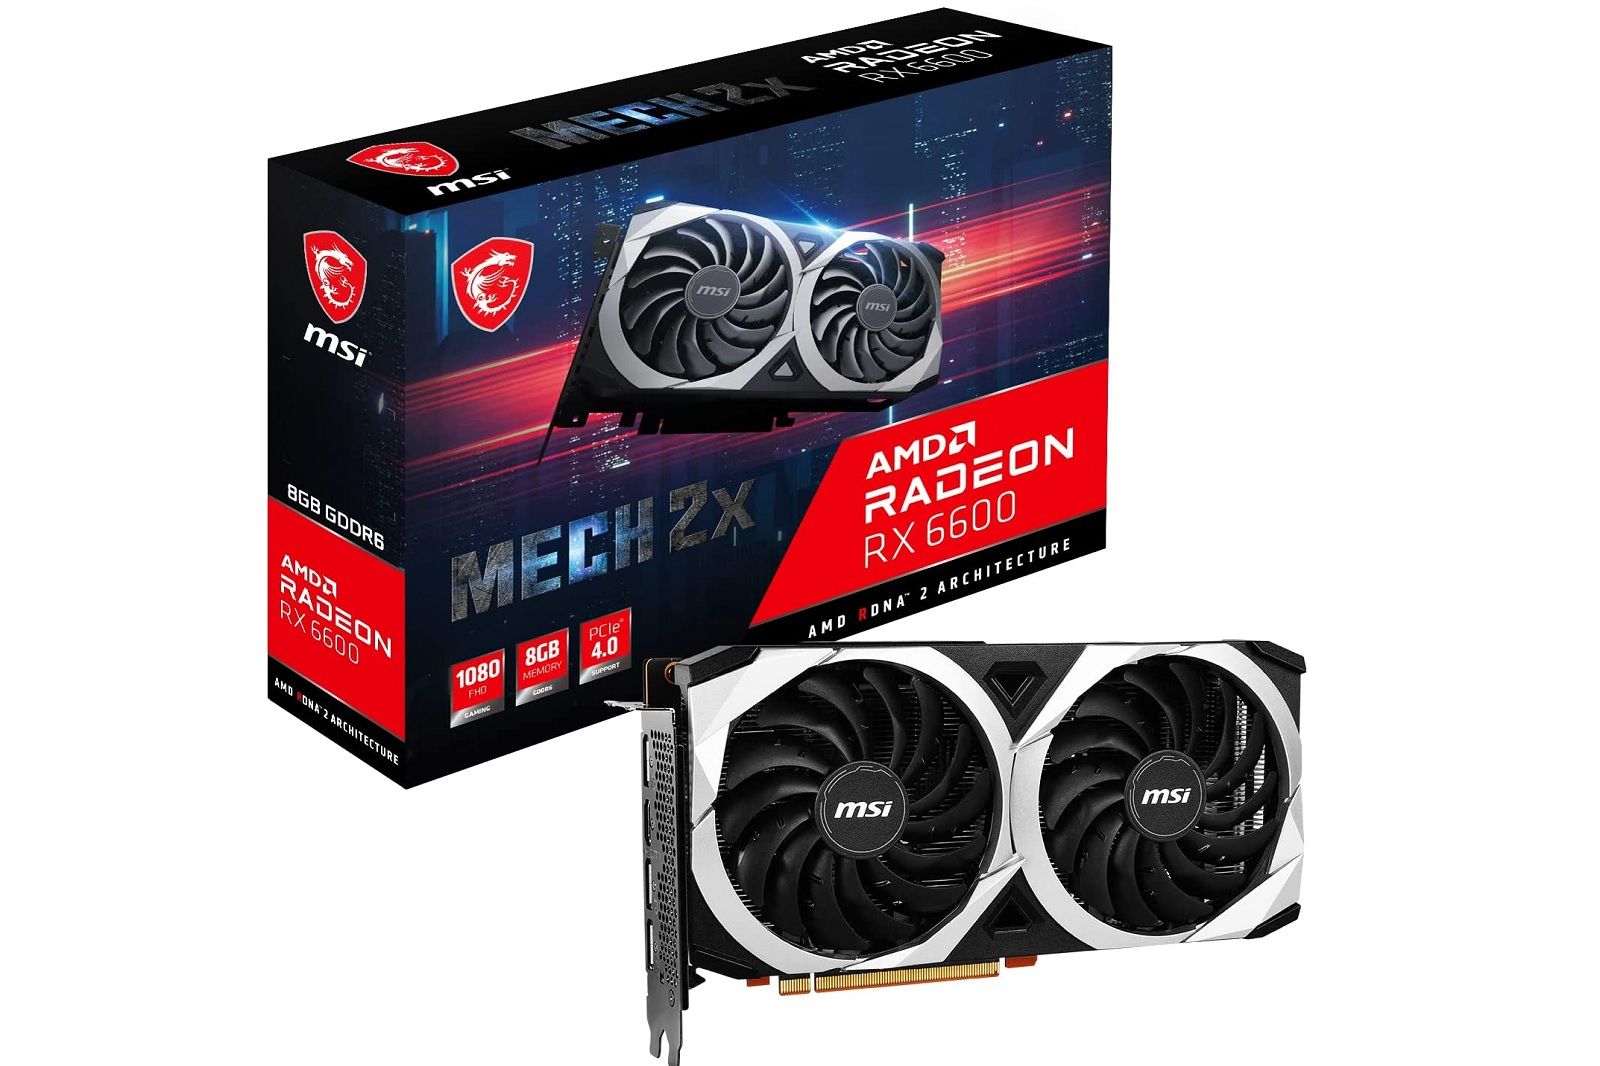 This AMD Radeon RX 6600 graphics card is an utter bargain with two free games included photo 1